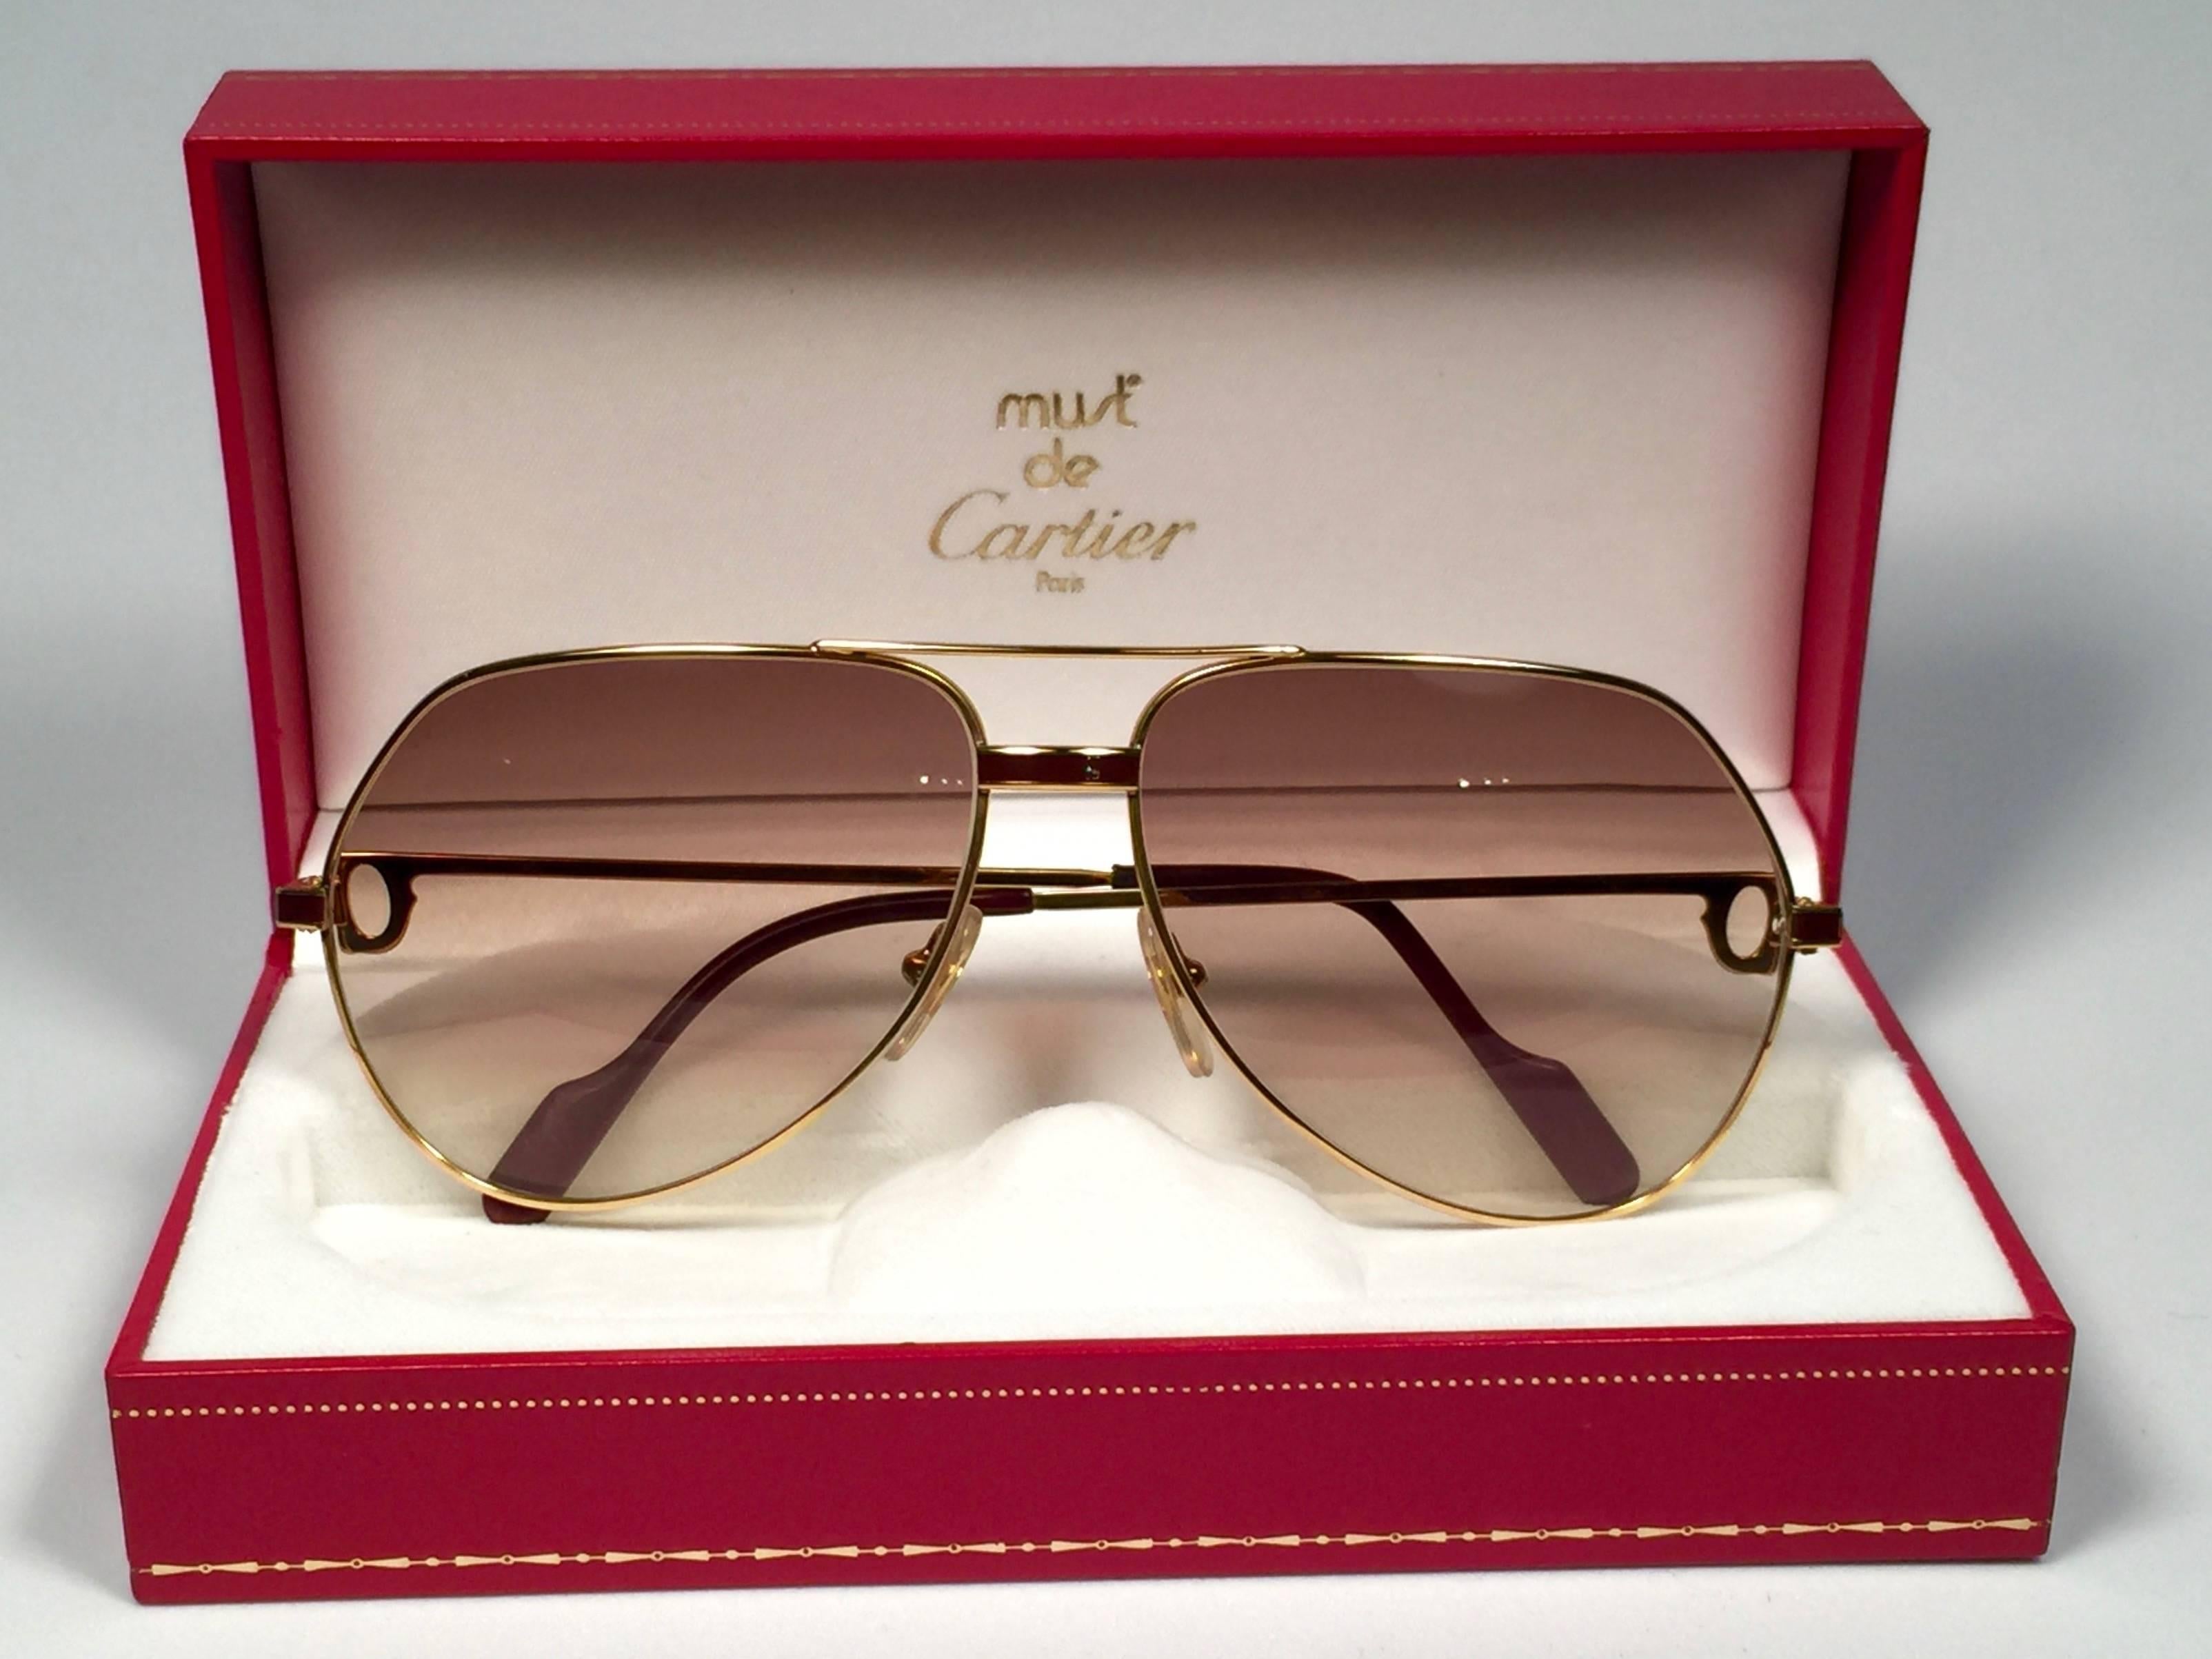 New from 1983!!! Cartier Aviator Laque de Chine Heavy plated gold sunglasses with brown gradient (uv protection) Lenses.
All hallmarks. 
Red enamel with Cartier gold signs on the ear paddles. 
Both arms sport the C from Cartier on the temples.
